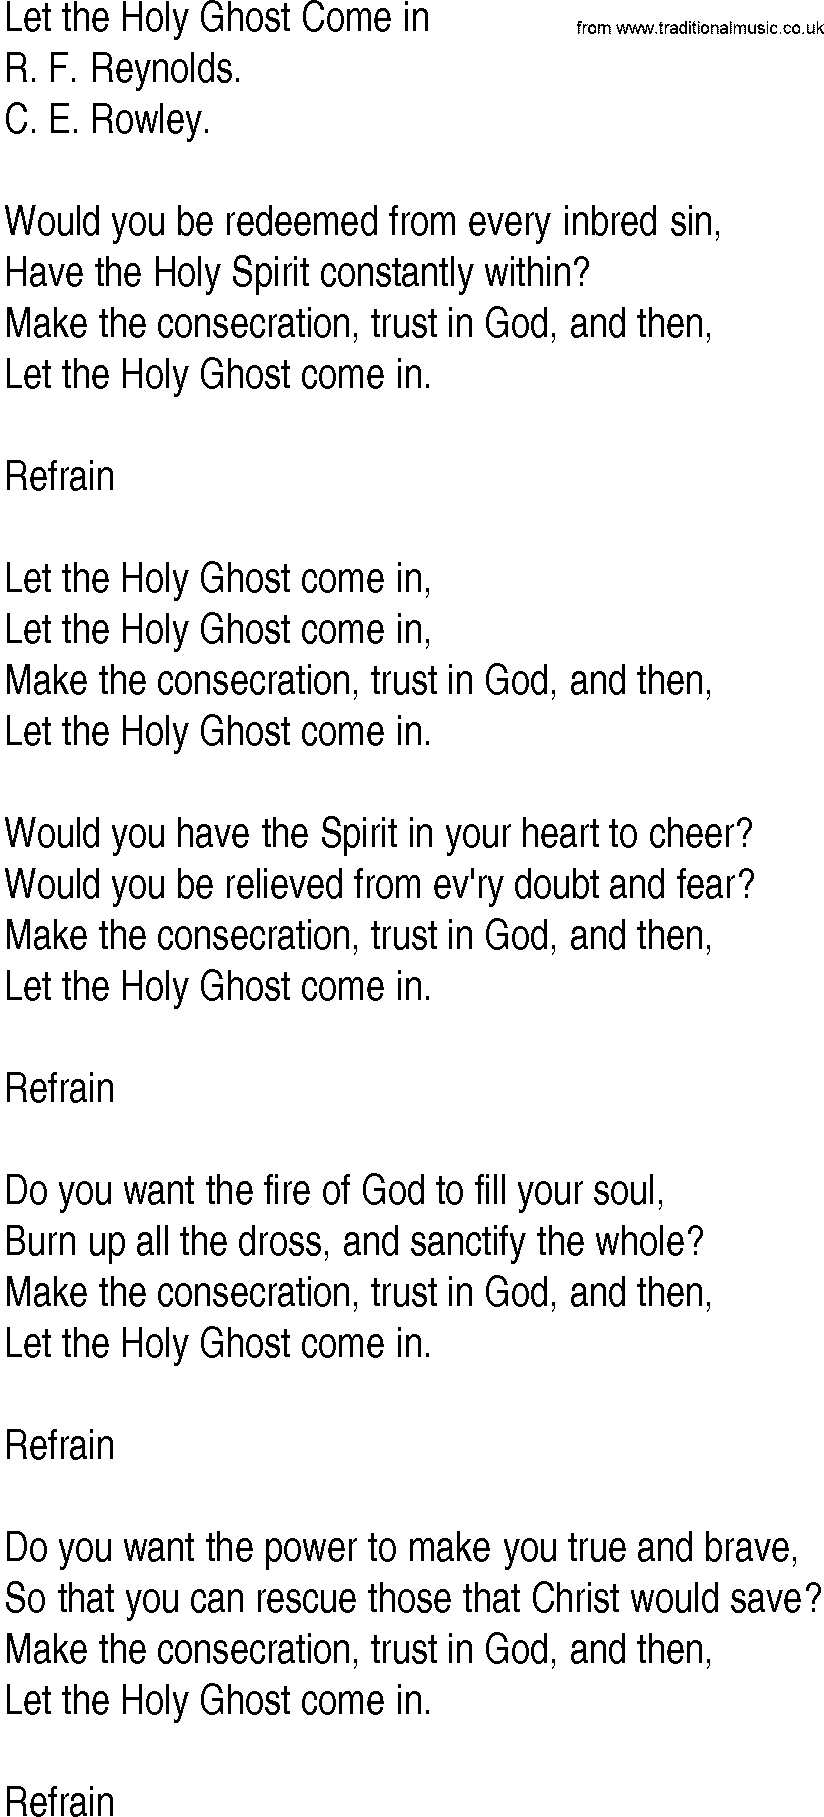 Hymn and Gospel Song: Let the Holy Ghost Come in by R F Reynolds lyrics